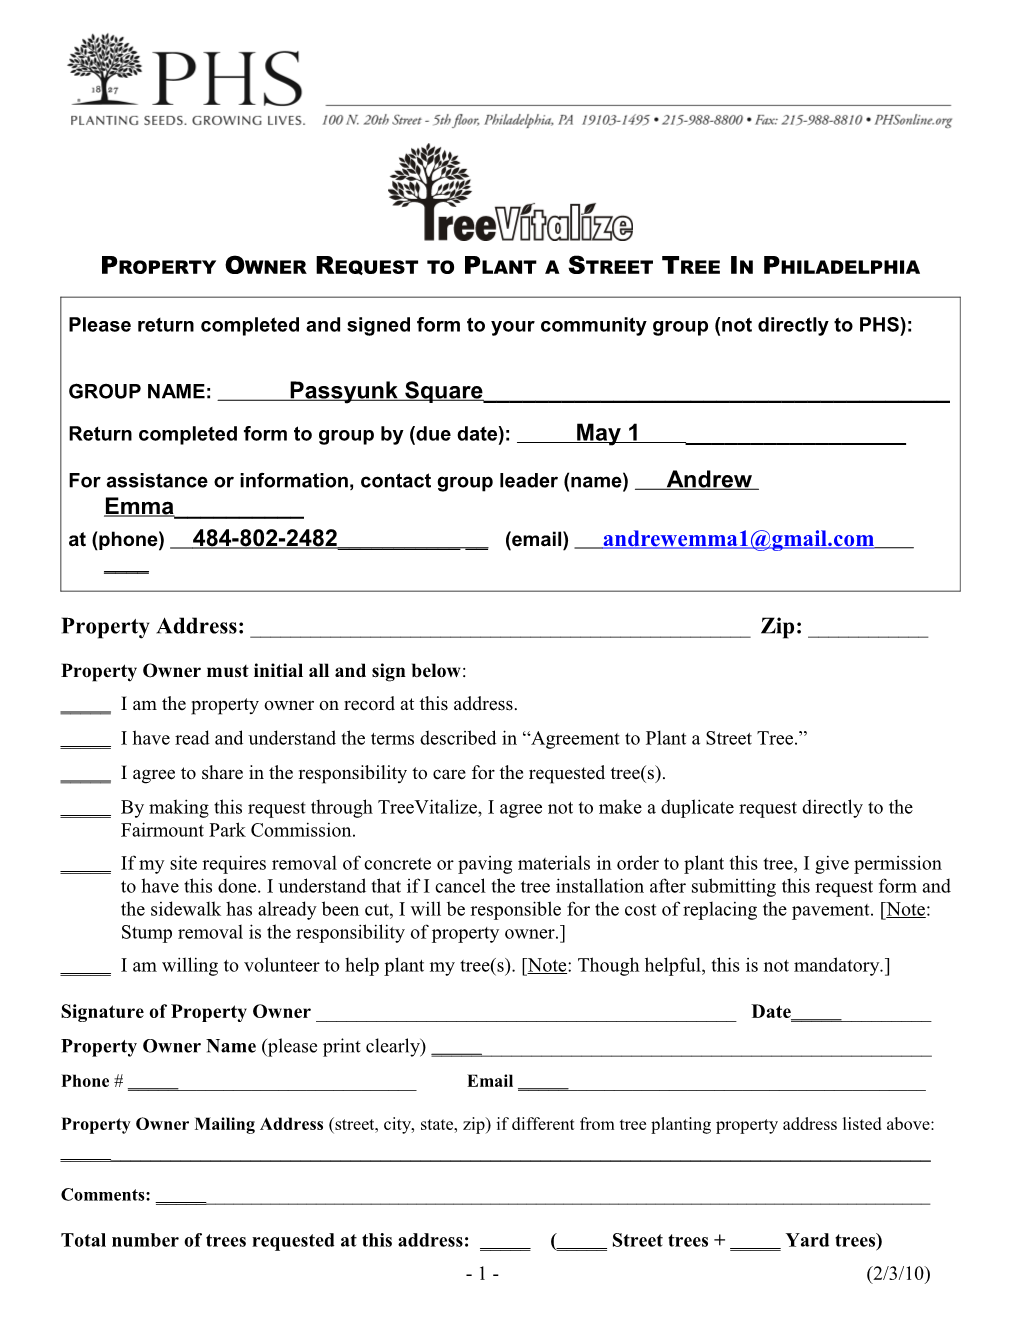 Property Owner Request to Plant a Street Tree in Philadelphia